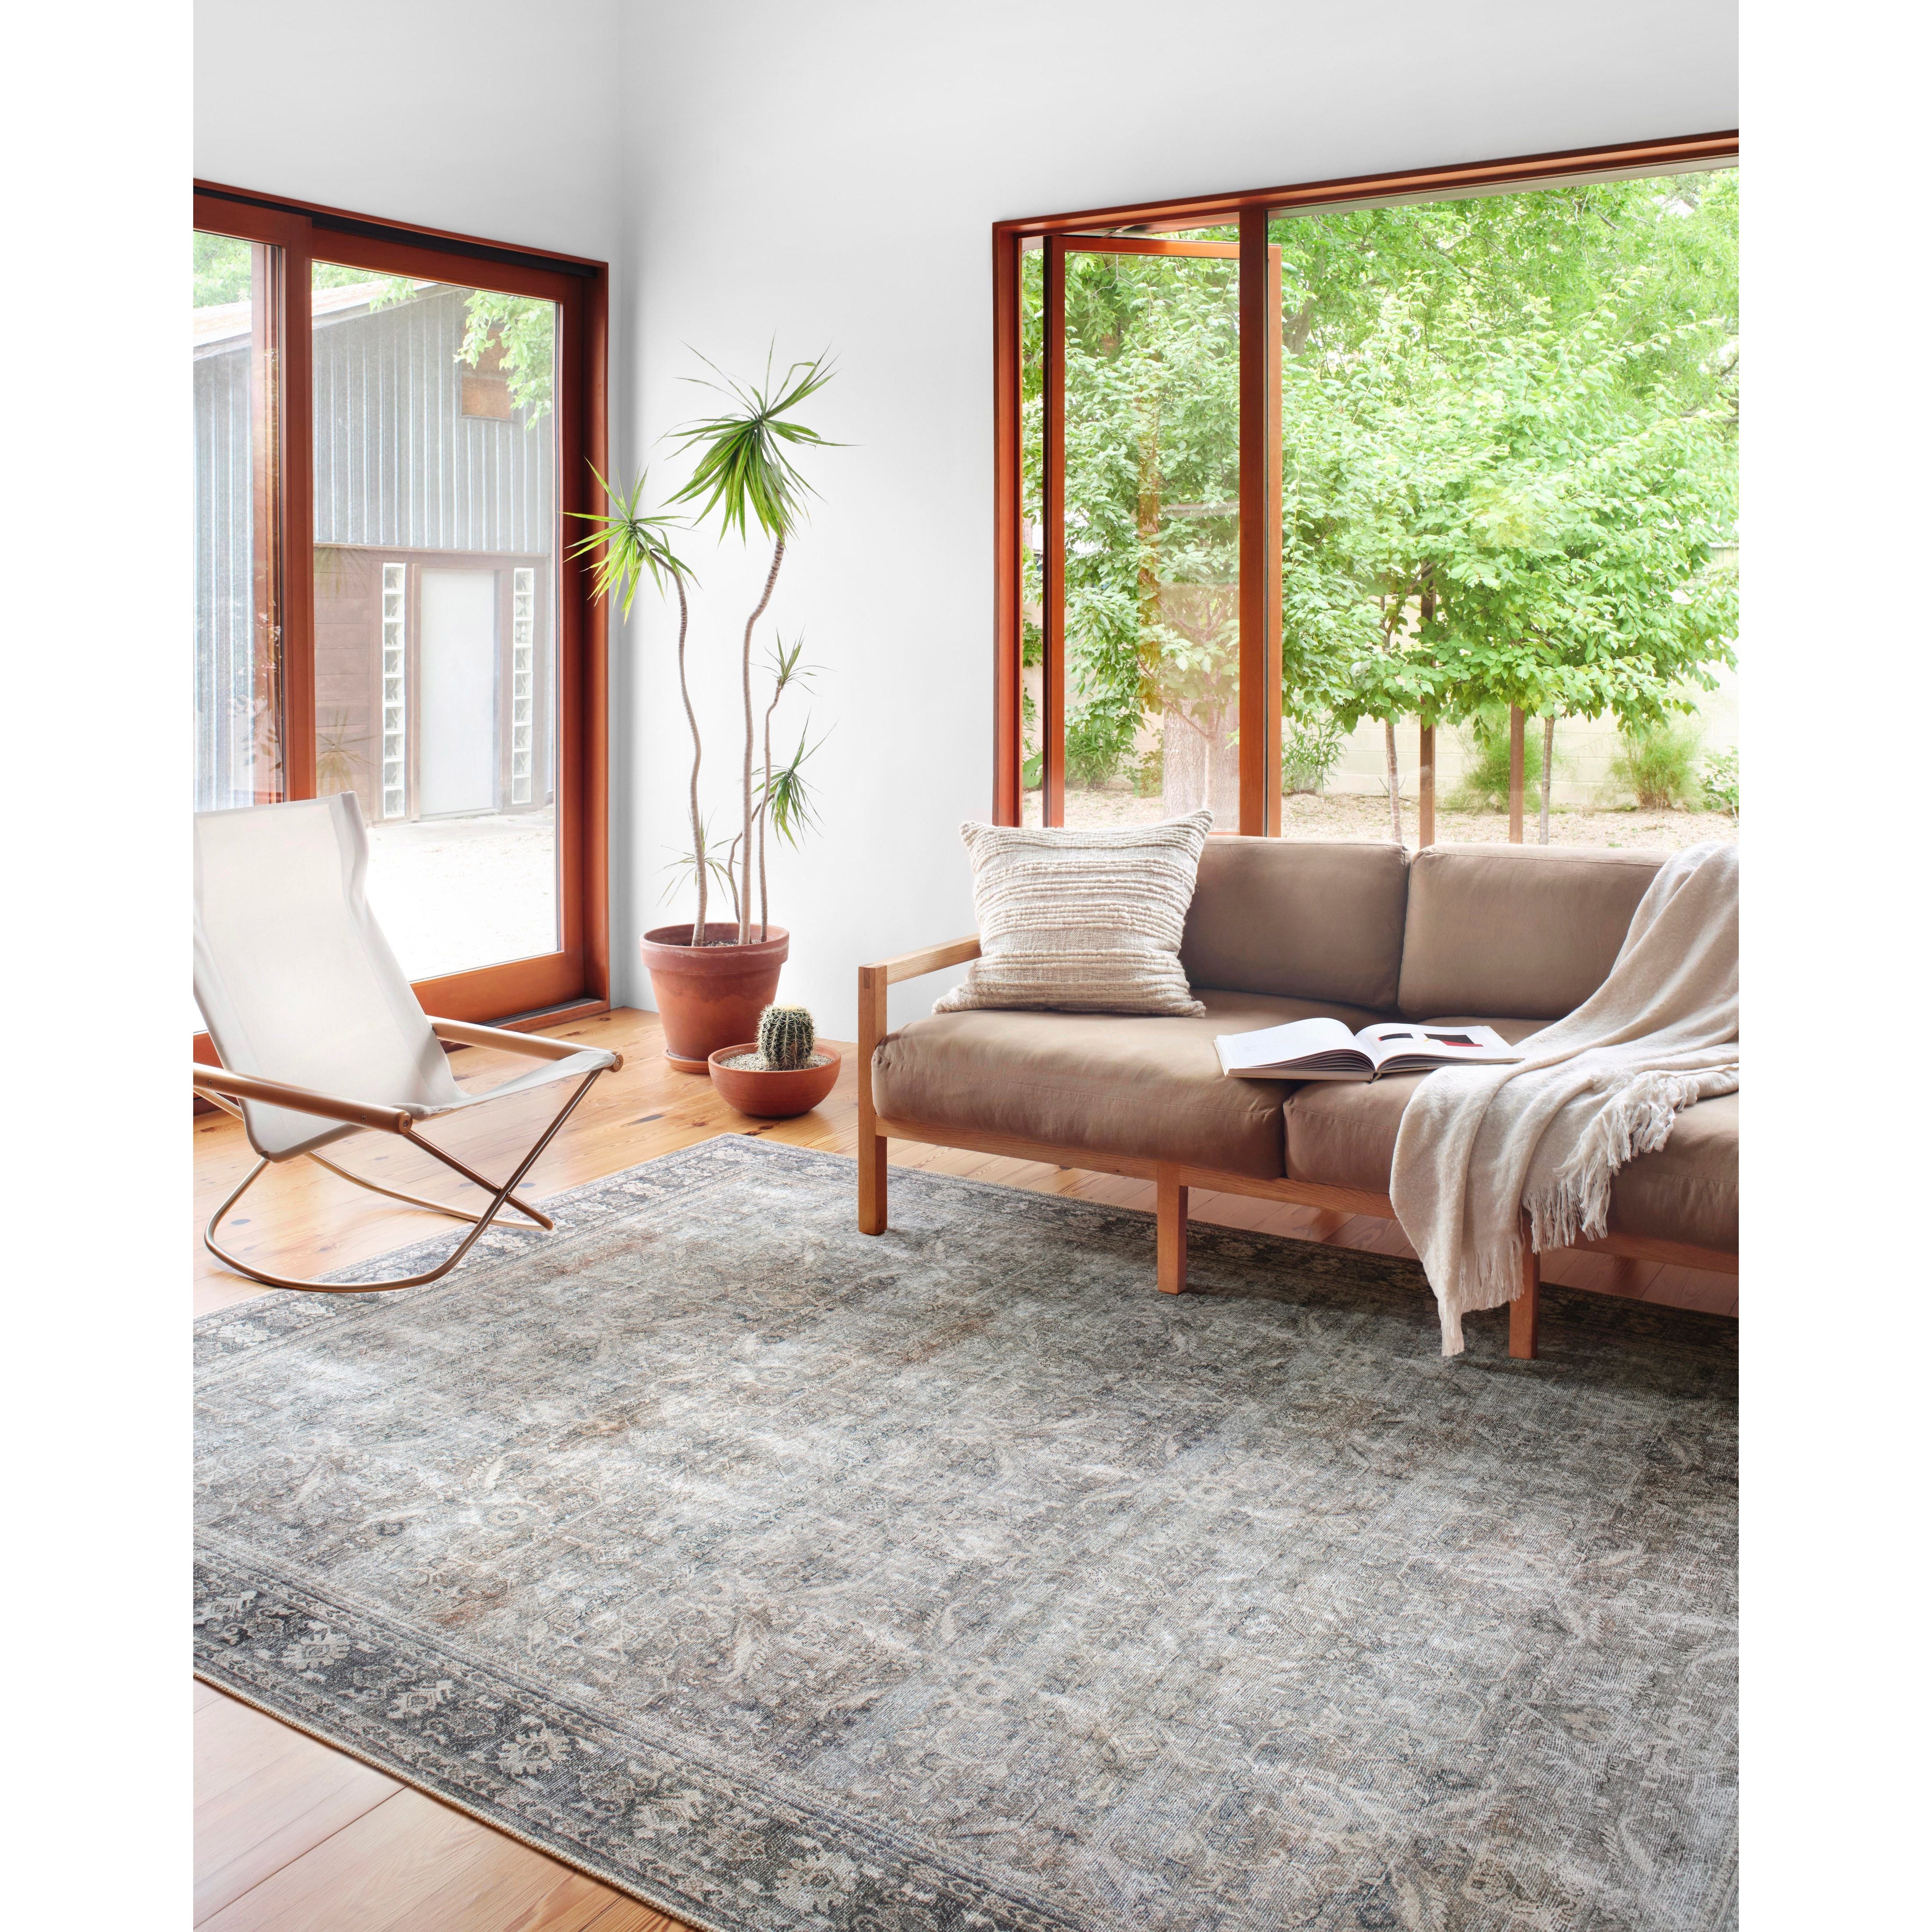 The Wynter Grey / Charcoal WYN-07 area rug showcases a one-of-a-kind vintage or antique area rug look power-loomed of 100% polyester. This rug brings in tones of silver, blue, and tan. The rug is ideal for high traffic areas due to the rug's durability for living rooms, dining rooms, kitchens, hallways, and entryways. Amethyst Home provides interior design, new construction, custom furniture, and rugs for the Des Moines and Cedar Rapids metro area.